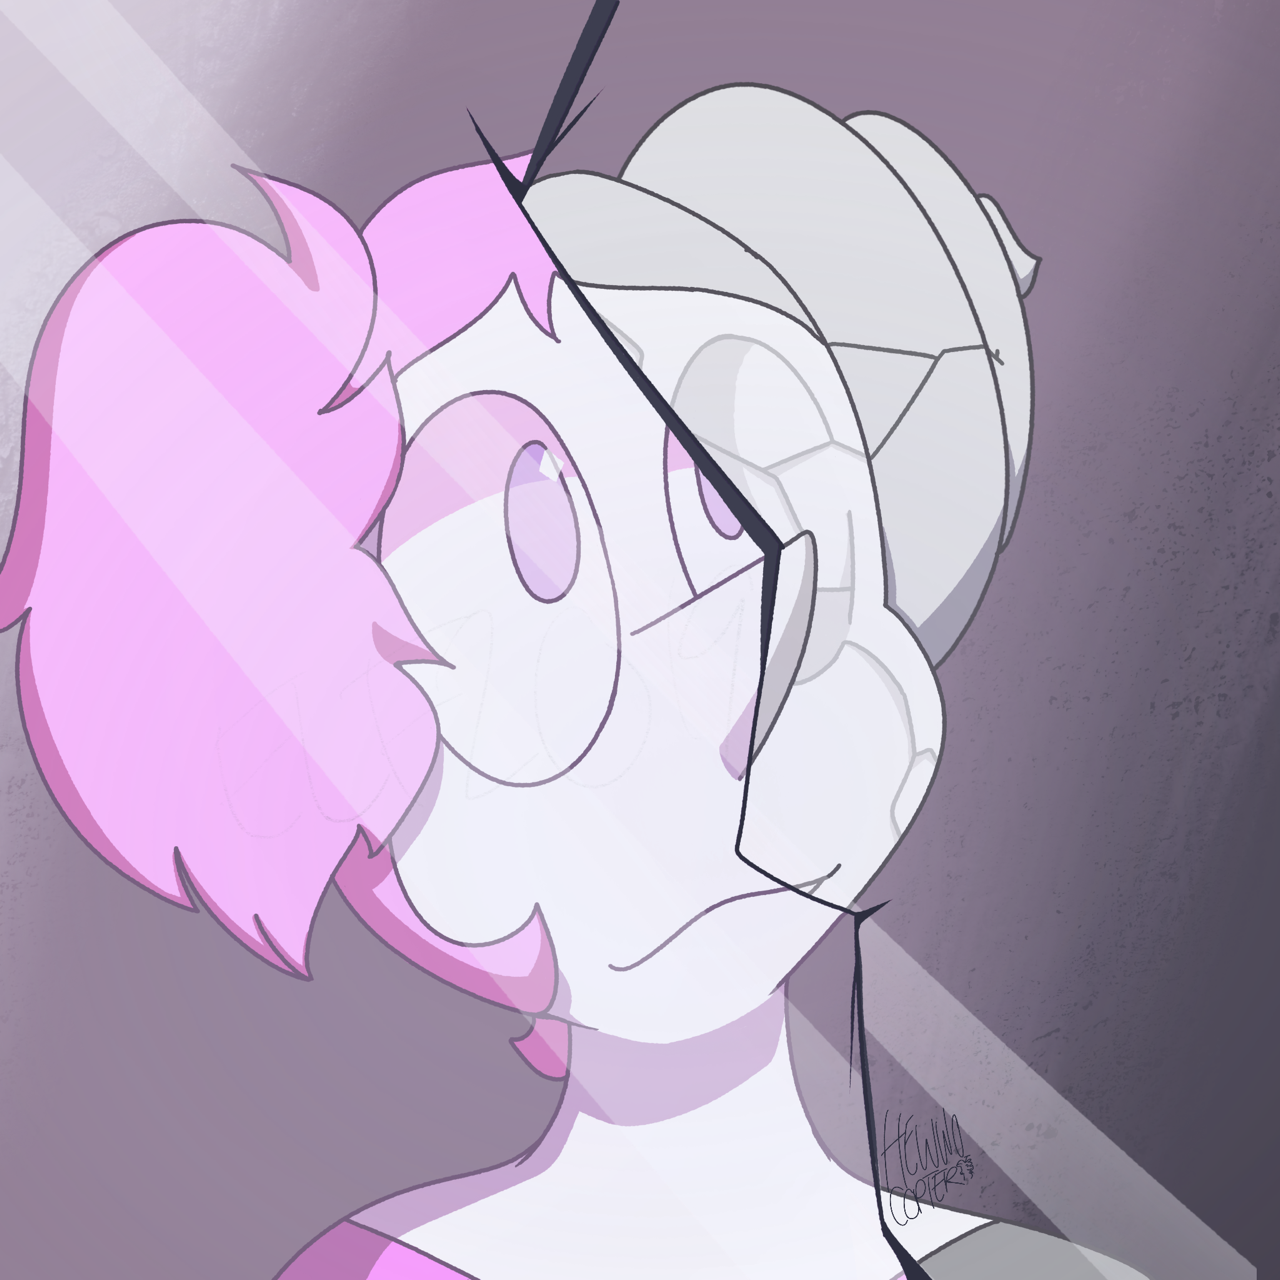 *insert some sentimental hoohah about White Pearl and her past*